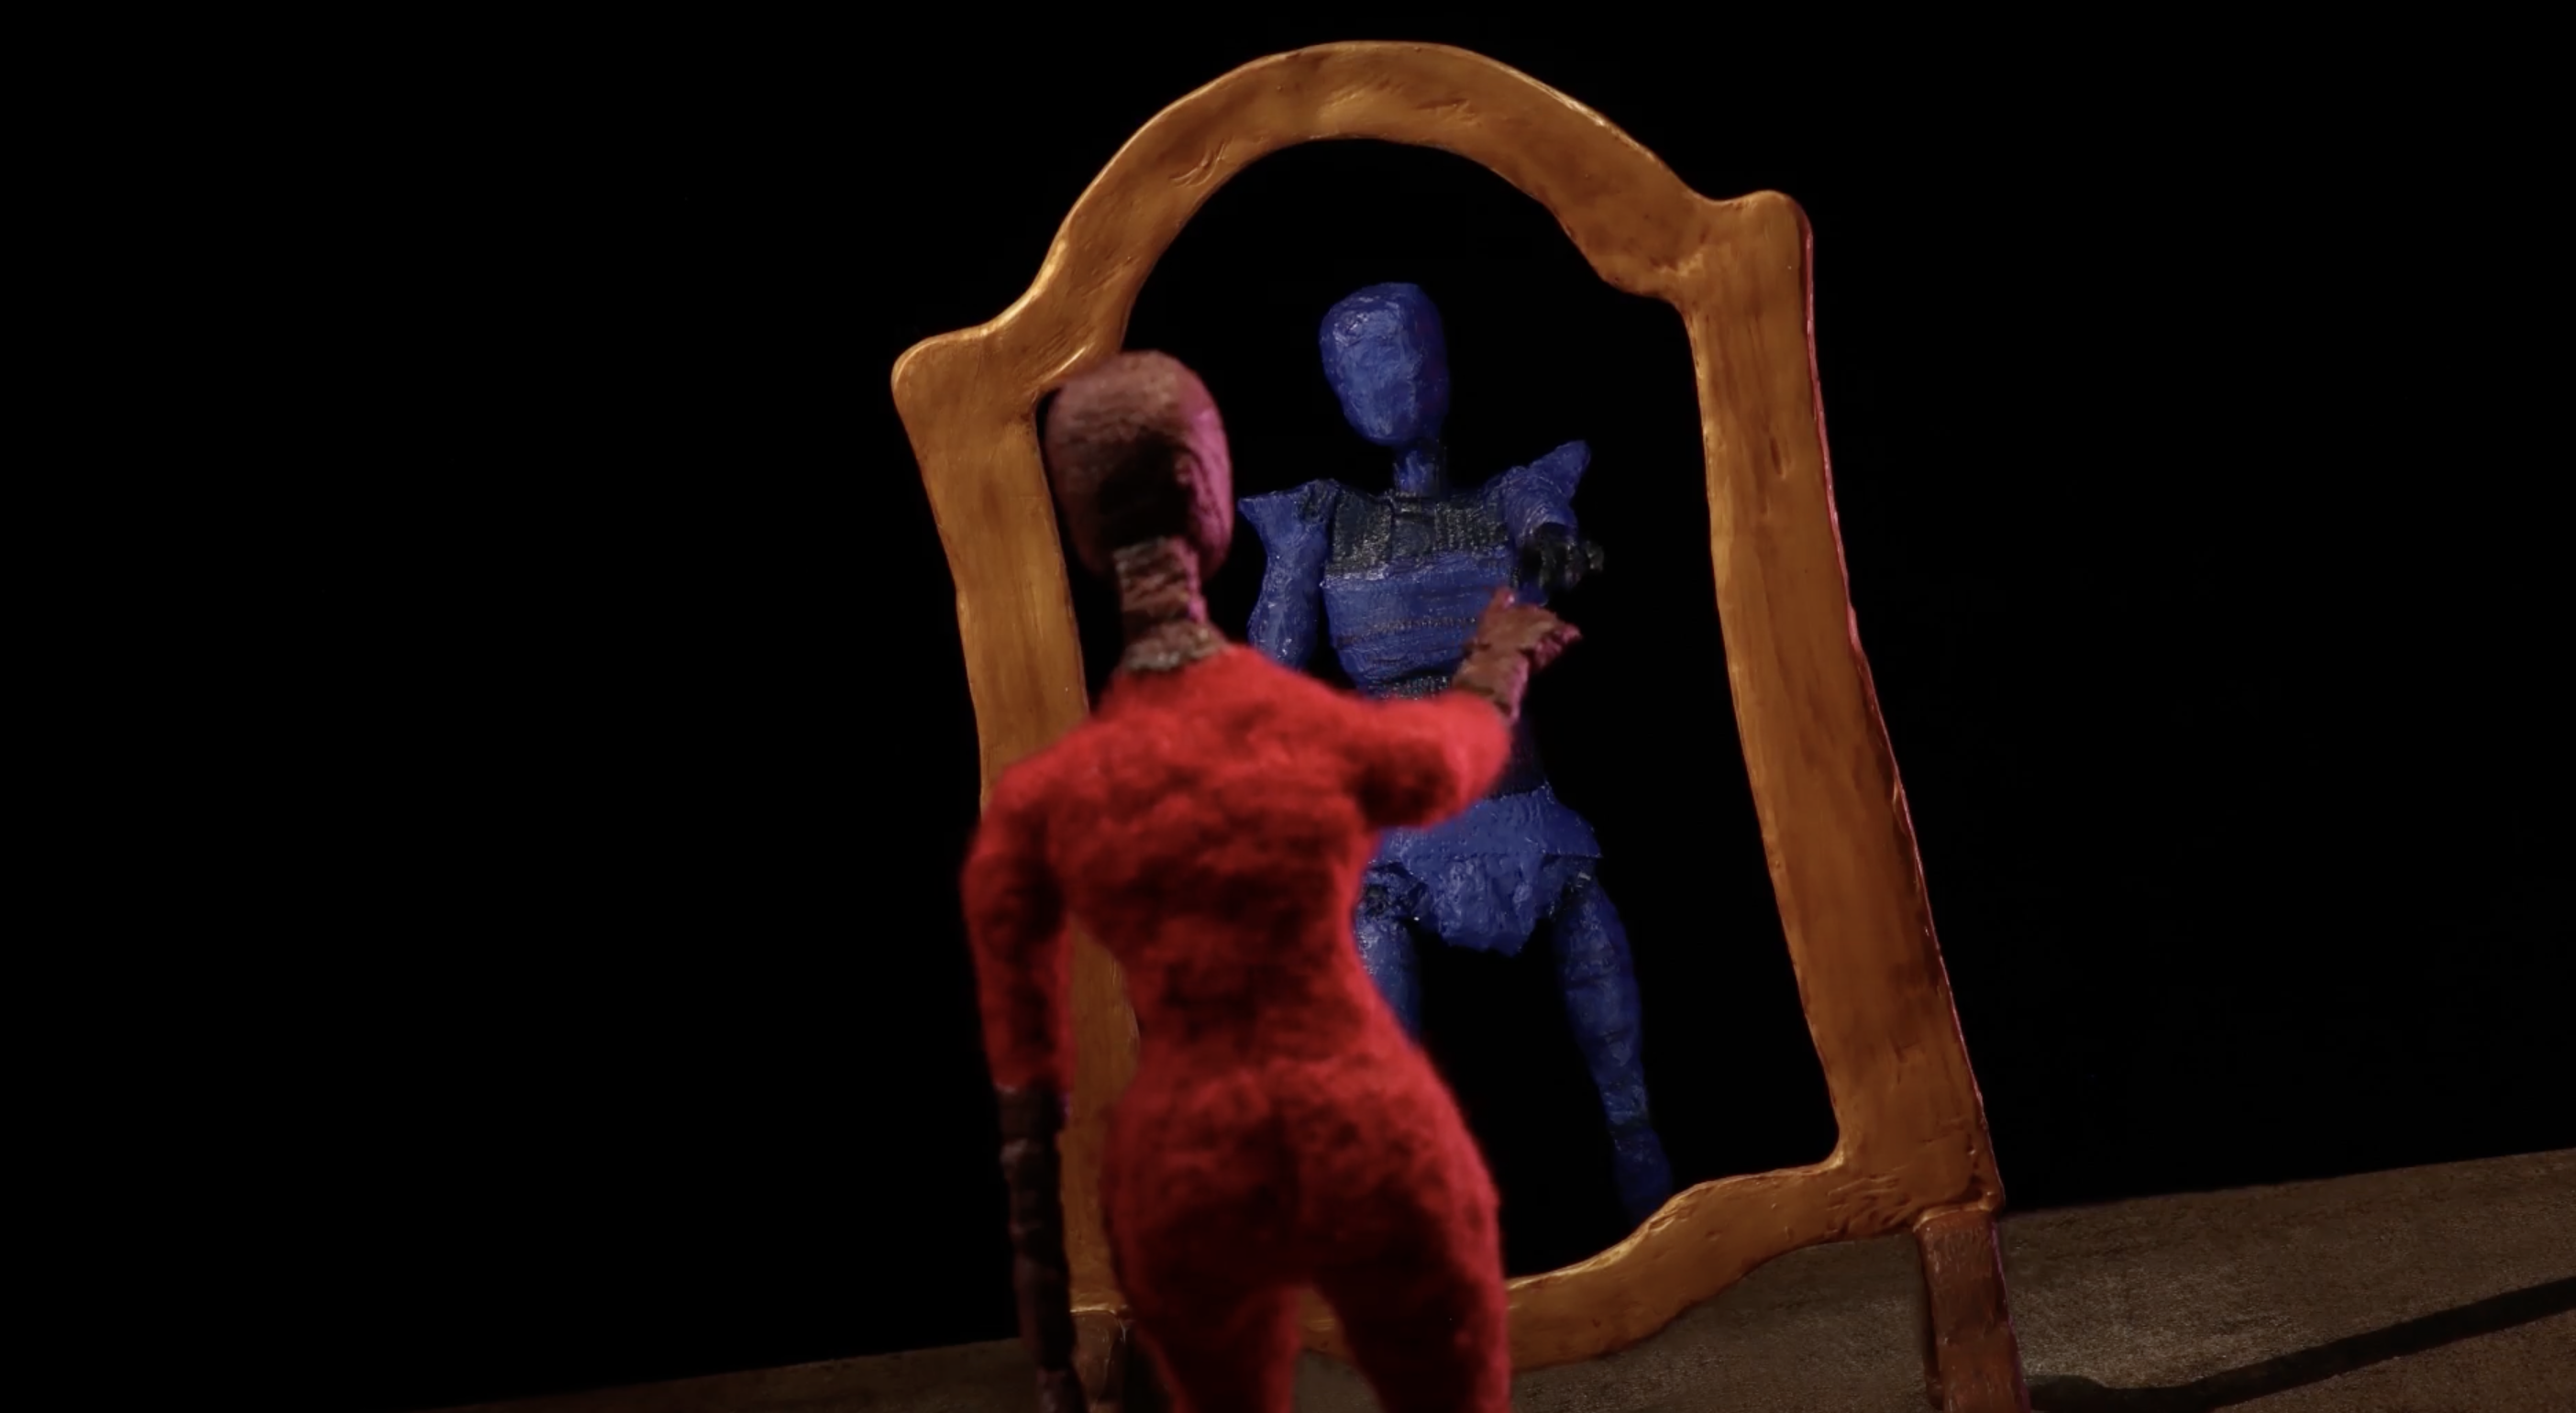 A stop motion character looks into the mirror.